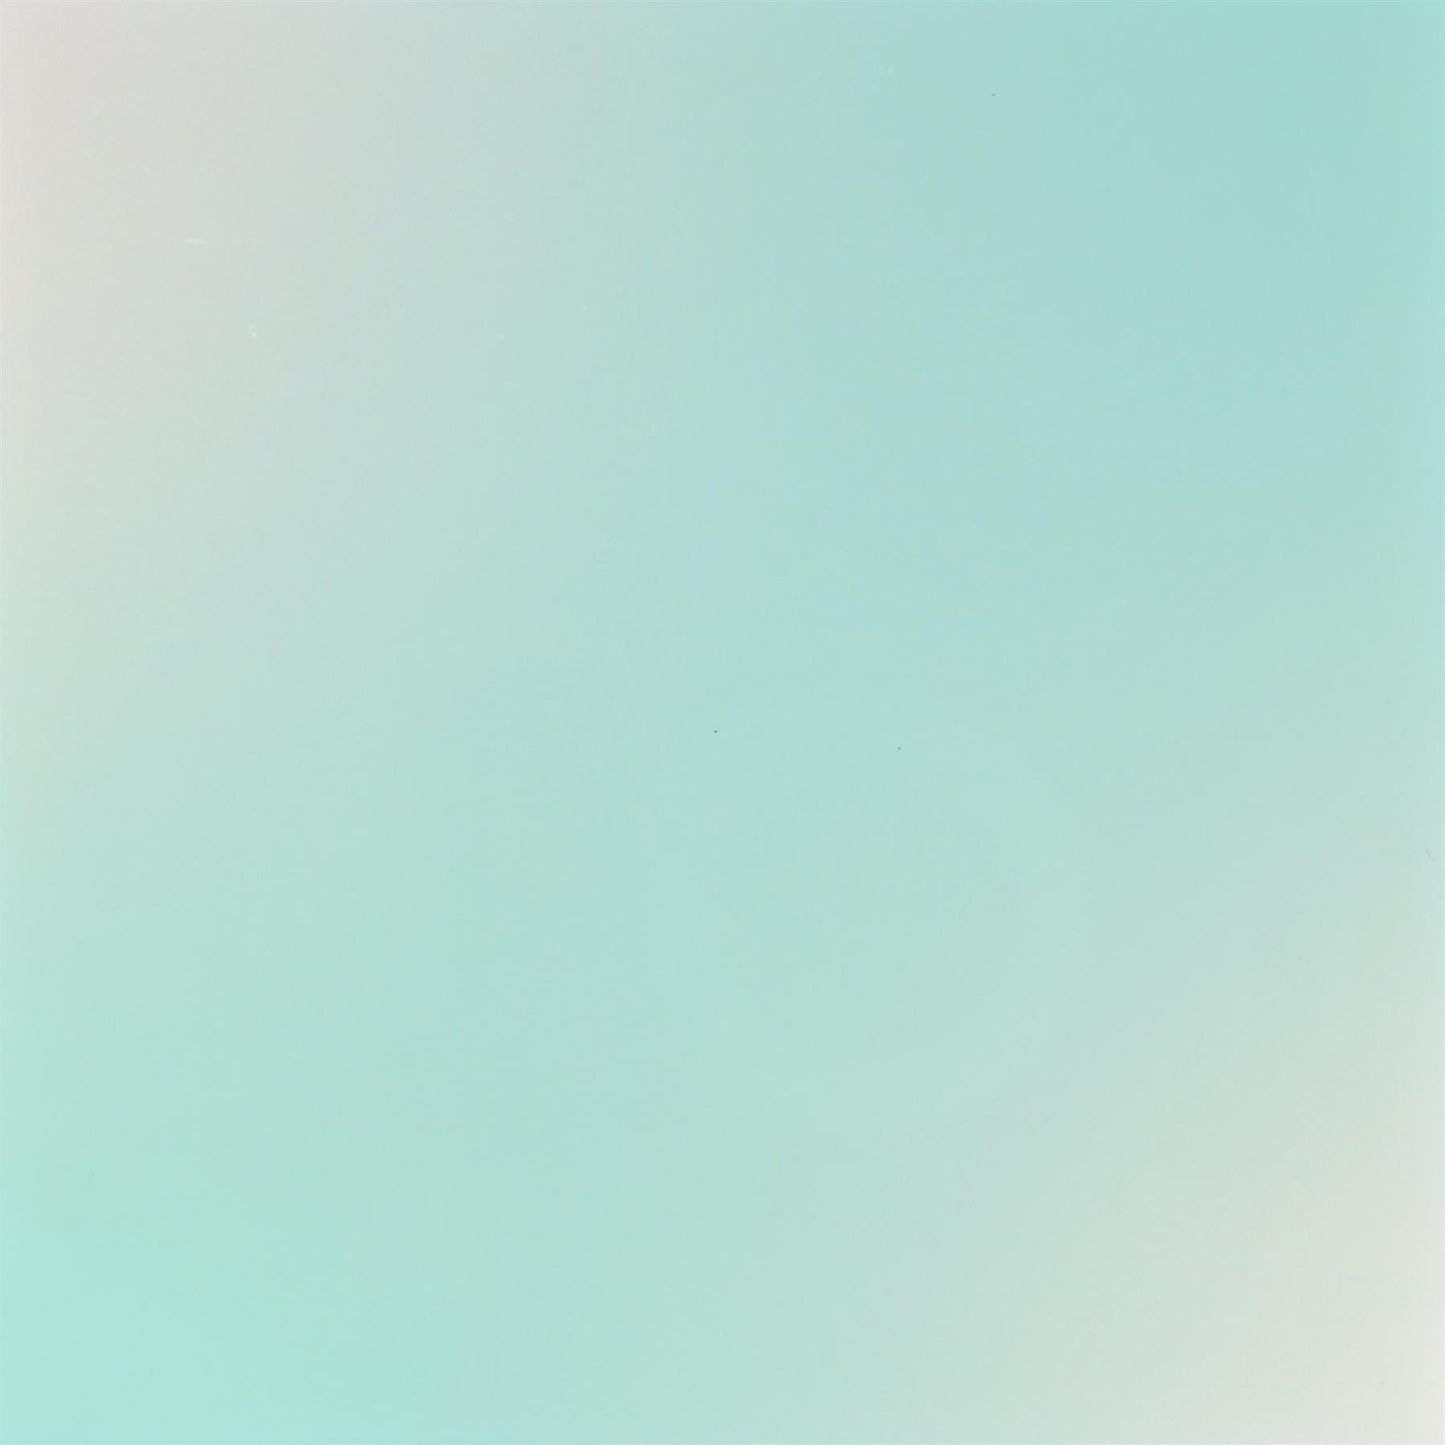 Incudo Green Pearlescent Acrylic Sheet - 98x98x3mm (Sample)